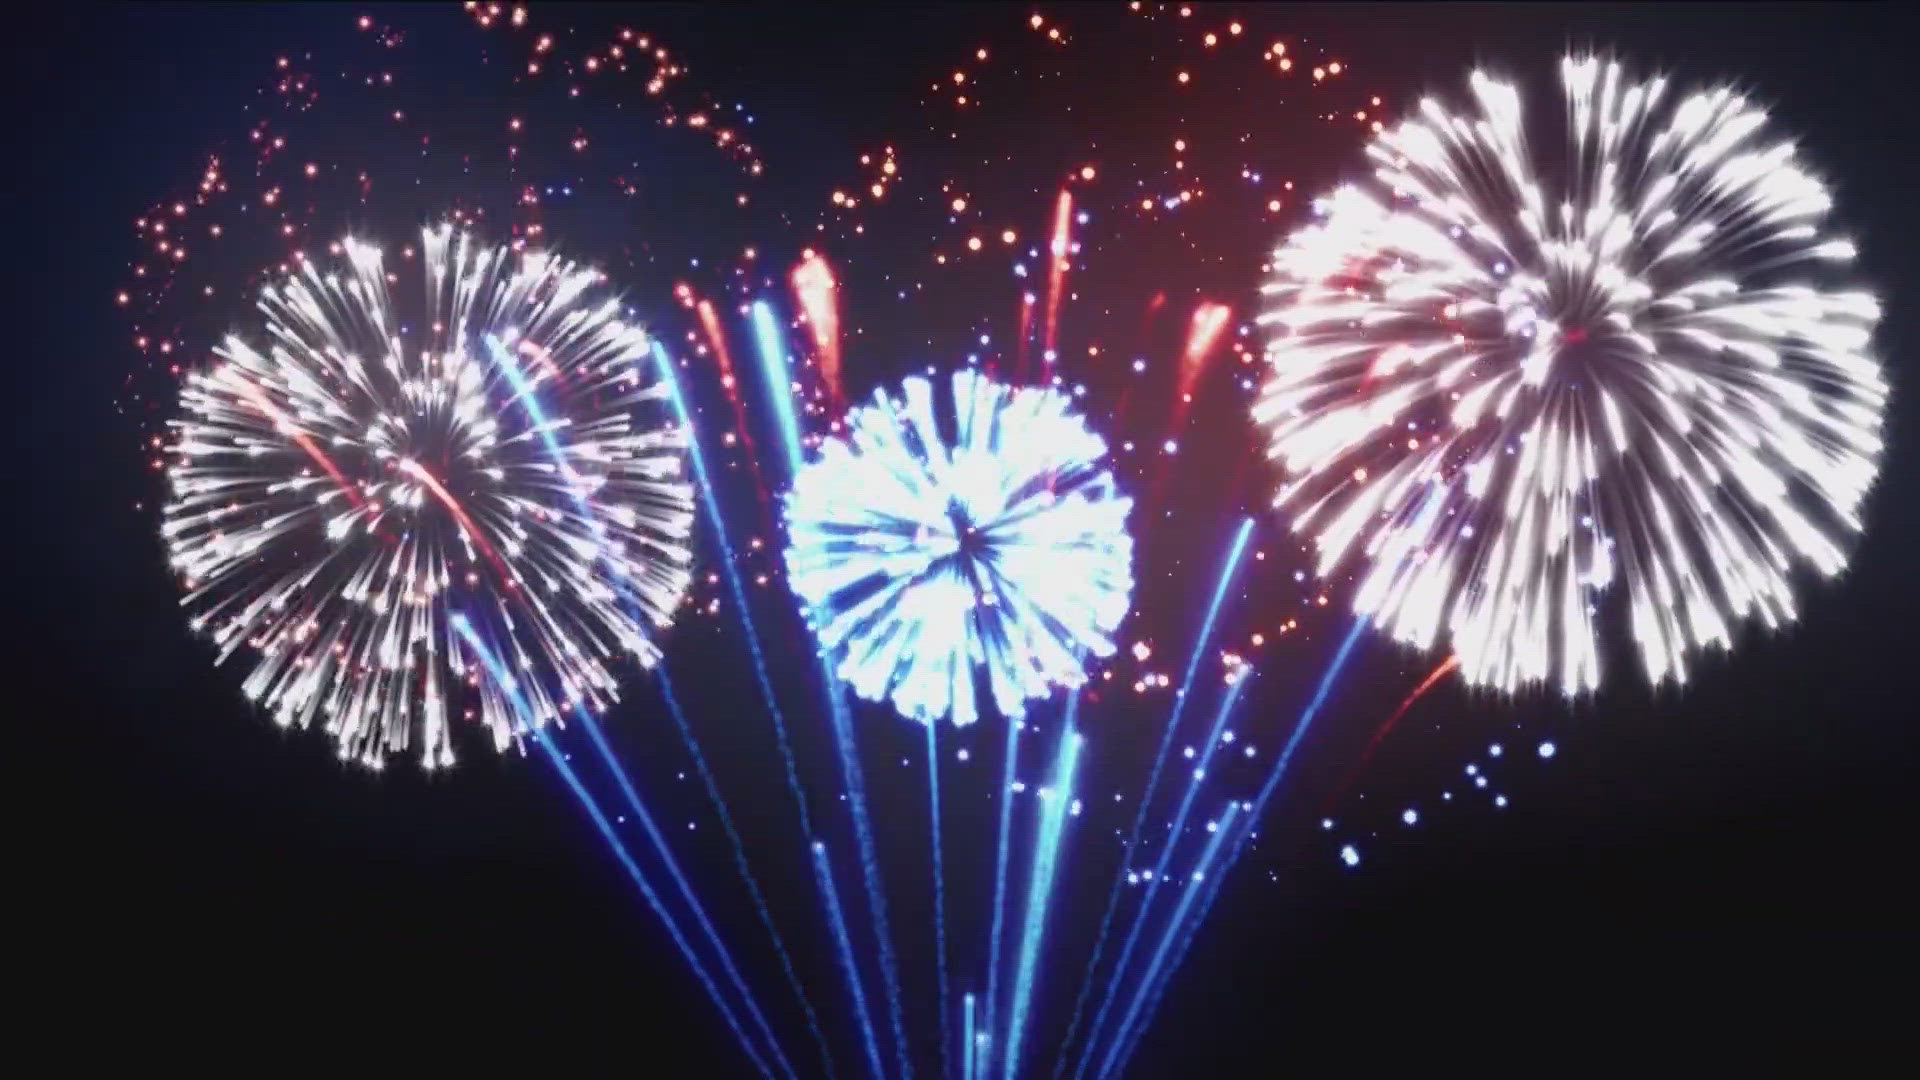 KTVB's event guide for Independence Day provides a breakdown of where to celebrate this week in southwestern Idaho and eastern Oregon.